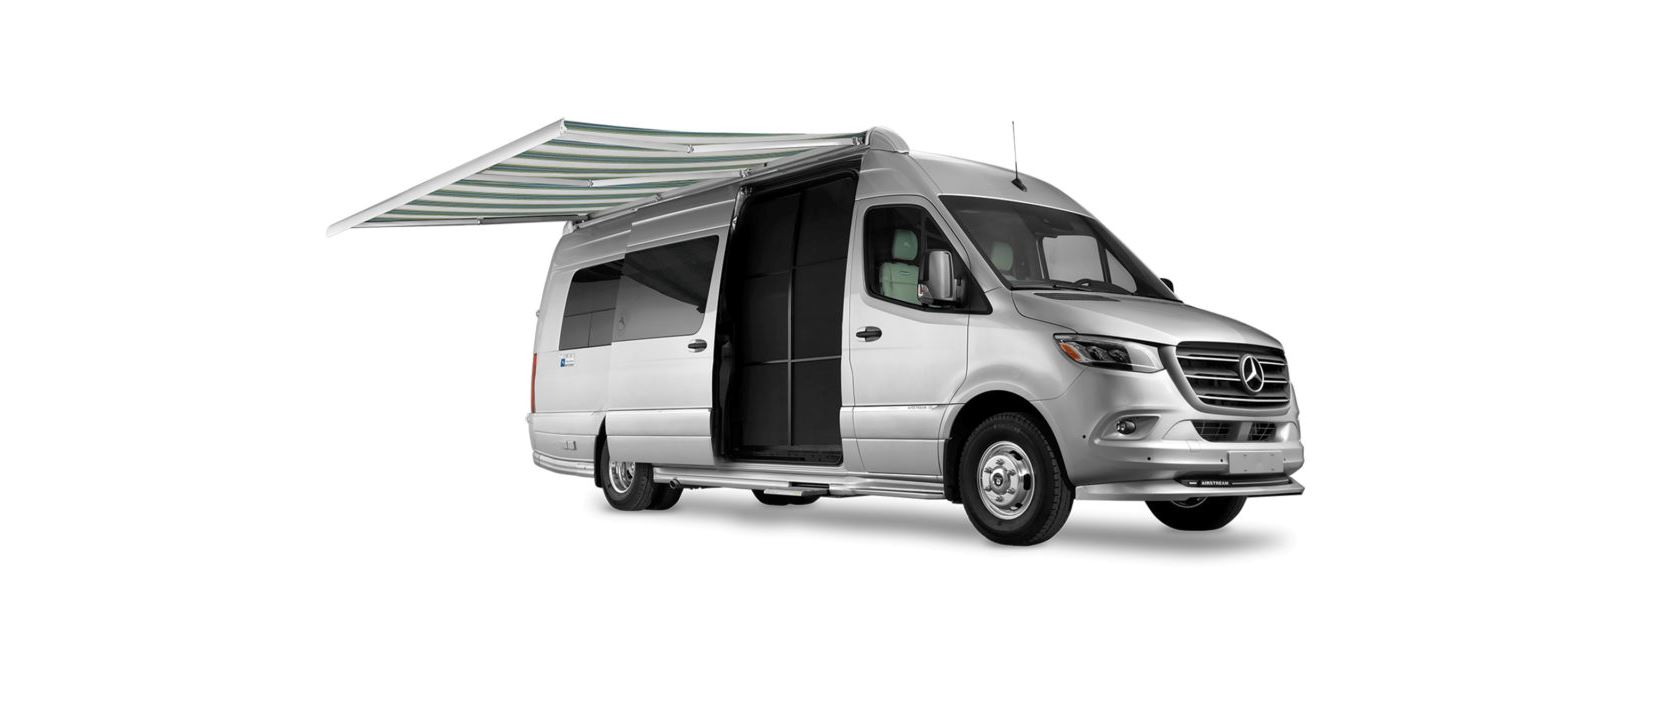 2021 Airstream Tommy Bahama Interstate 19